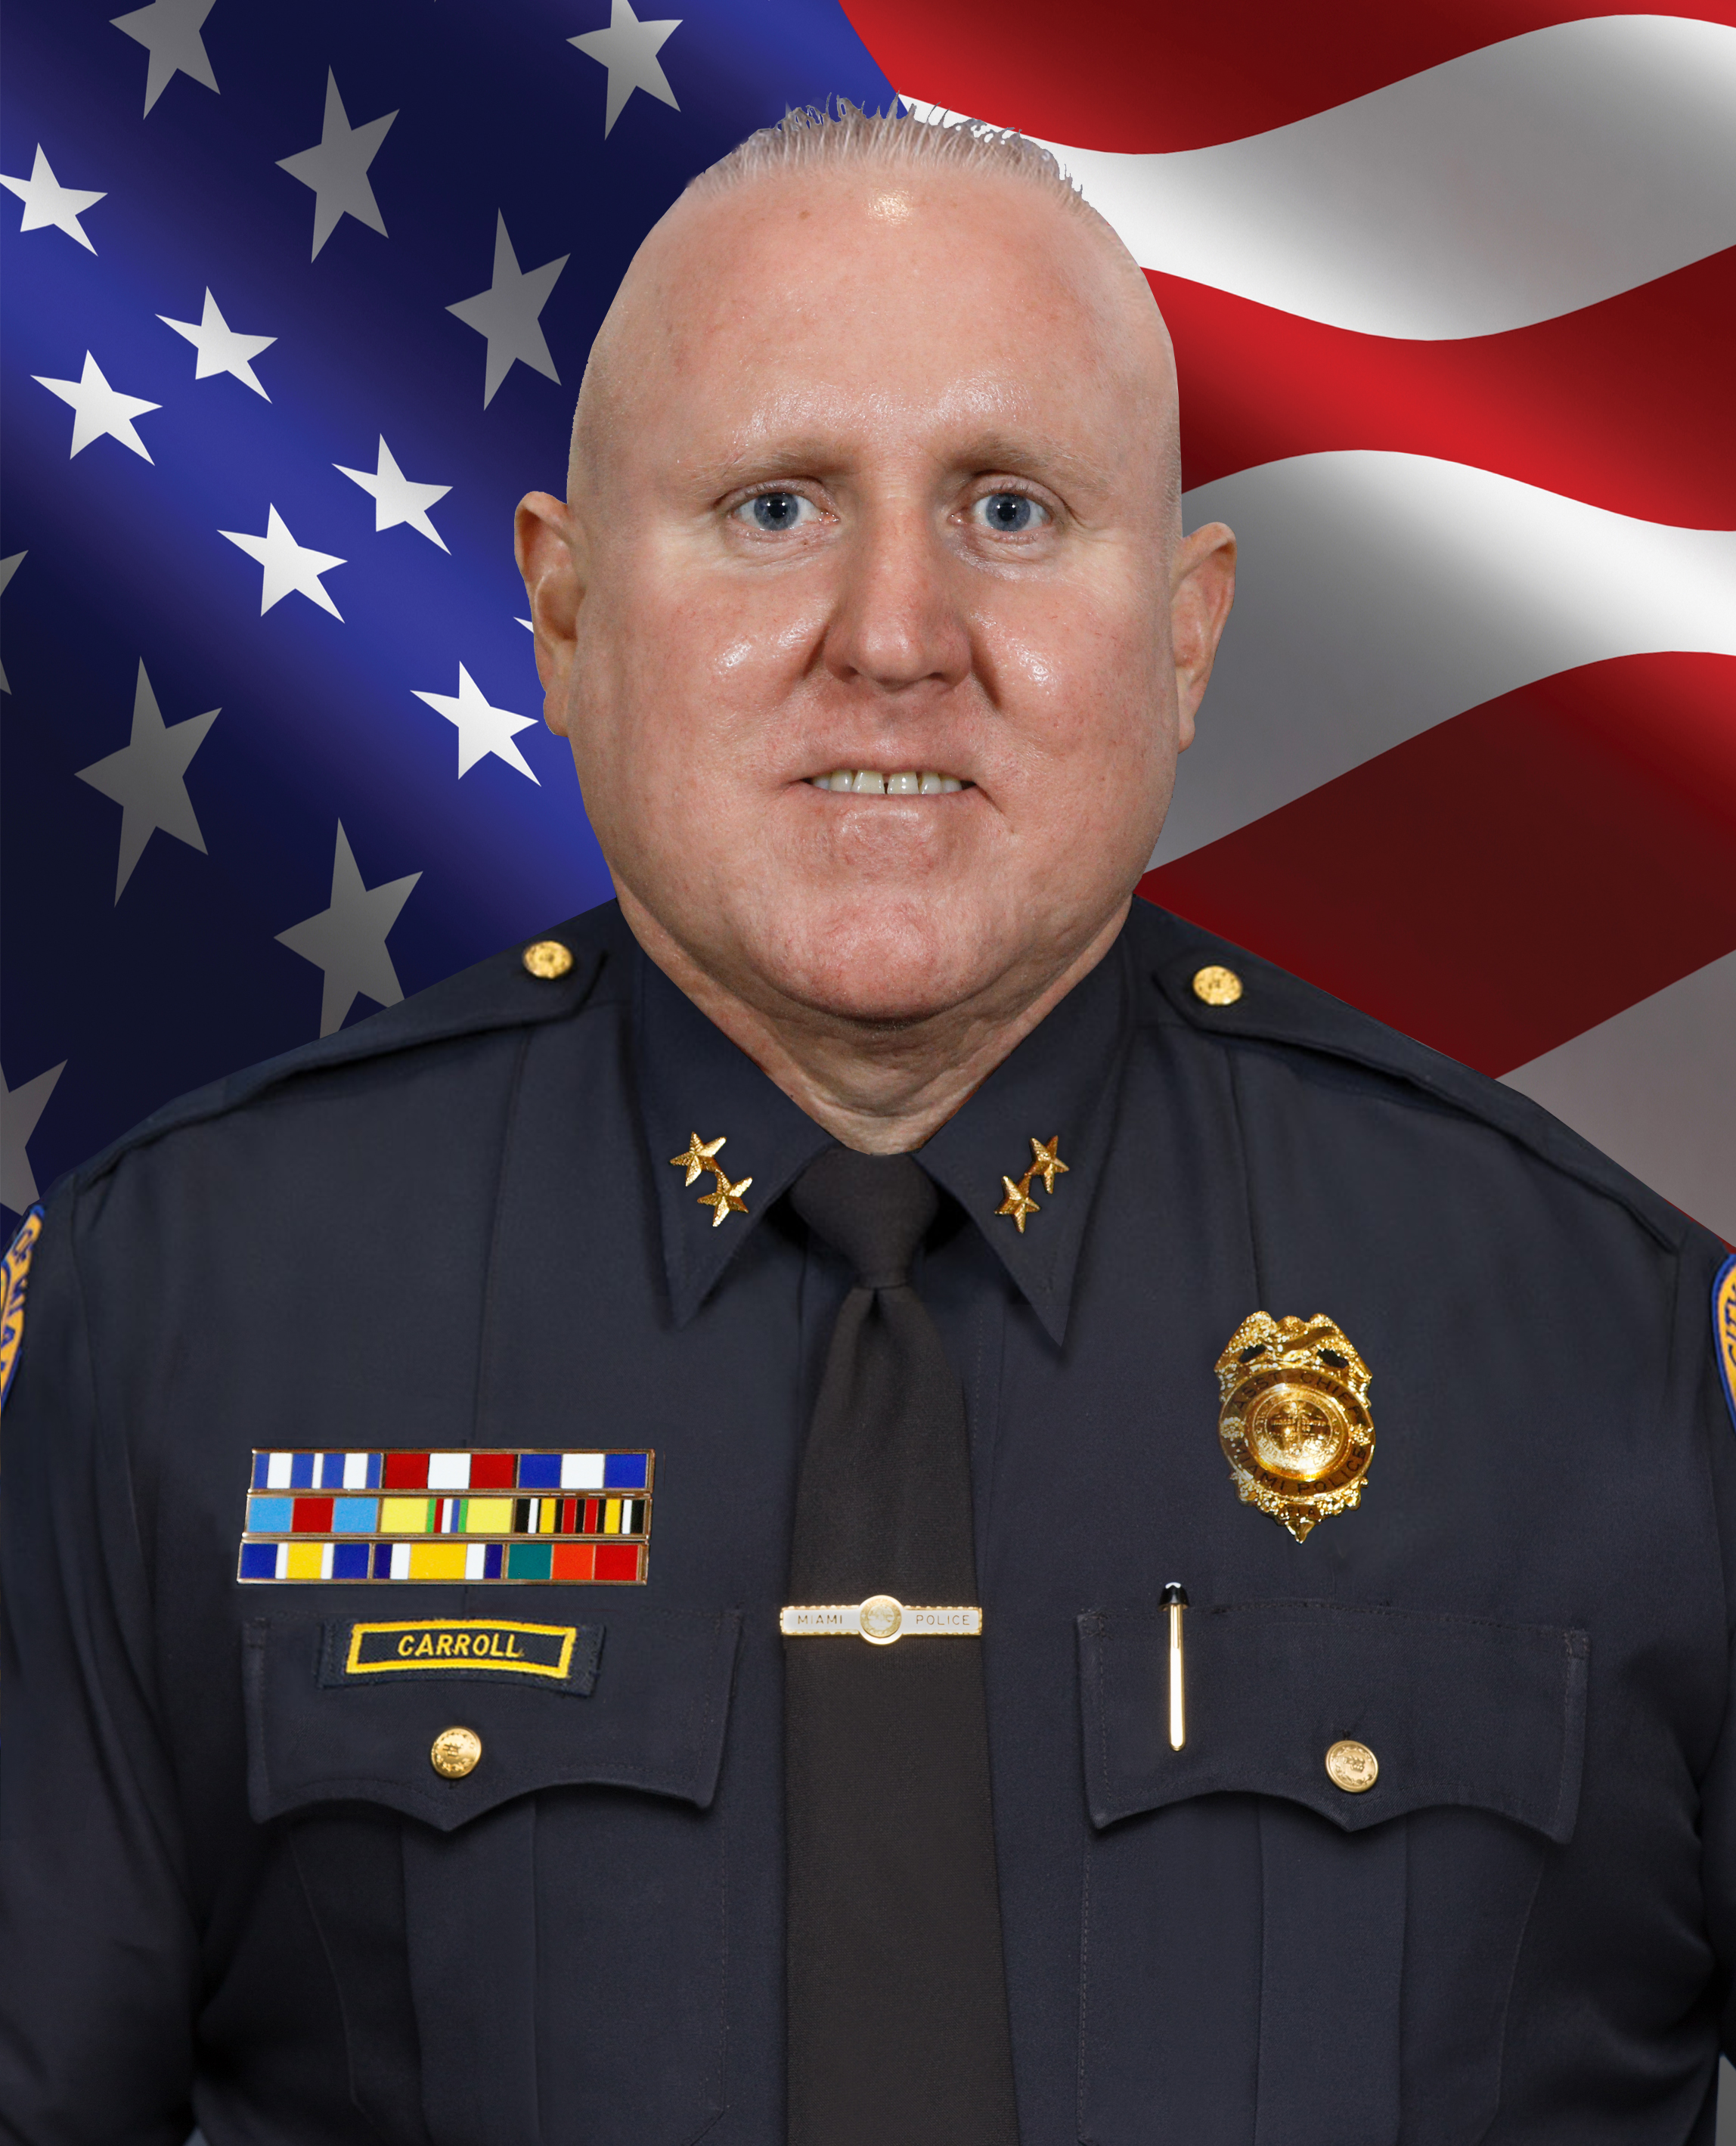 Assistant Chief Thomas Carroll